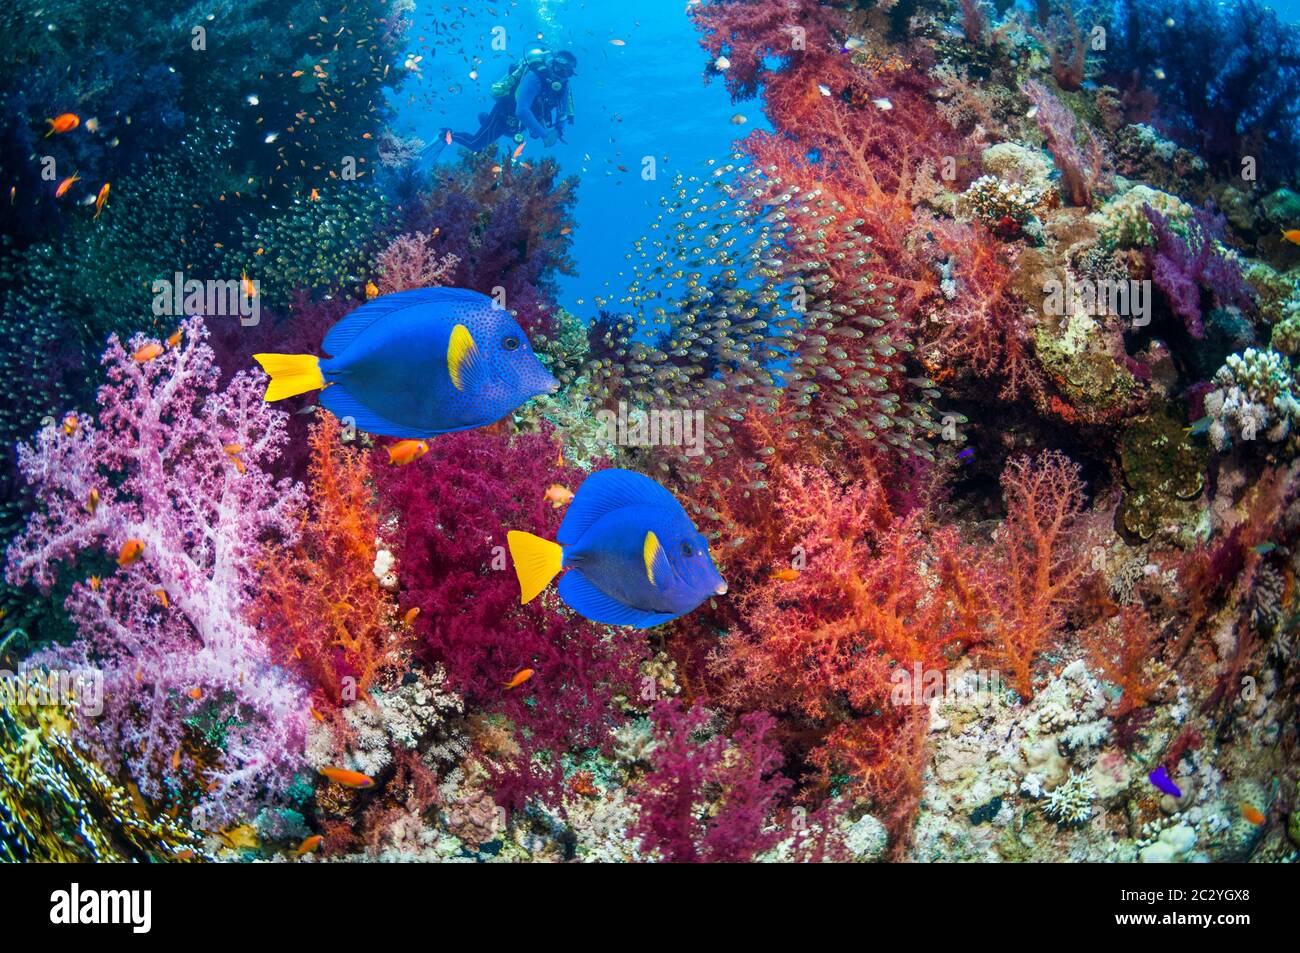 Yellowtail tang or surgeonfish (Zebrasoma xanthurum) swimming over coral reef with soft corals and a scuba diver in background.  Egypt, Red Sea. Stock Photo